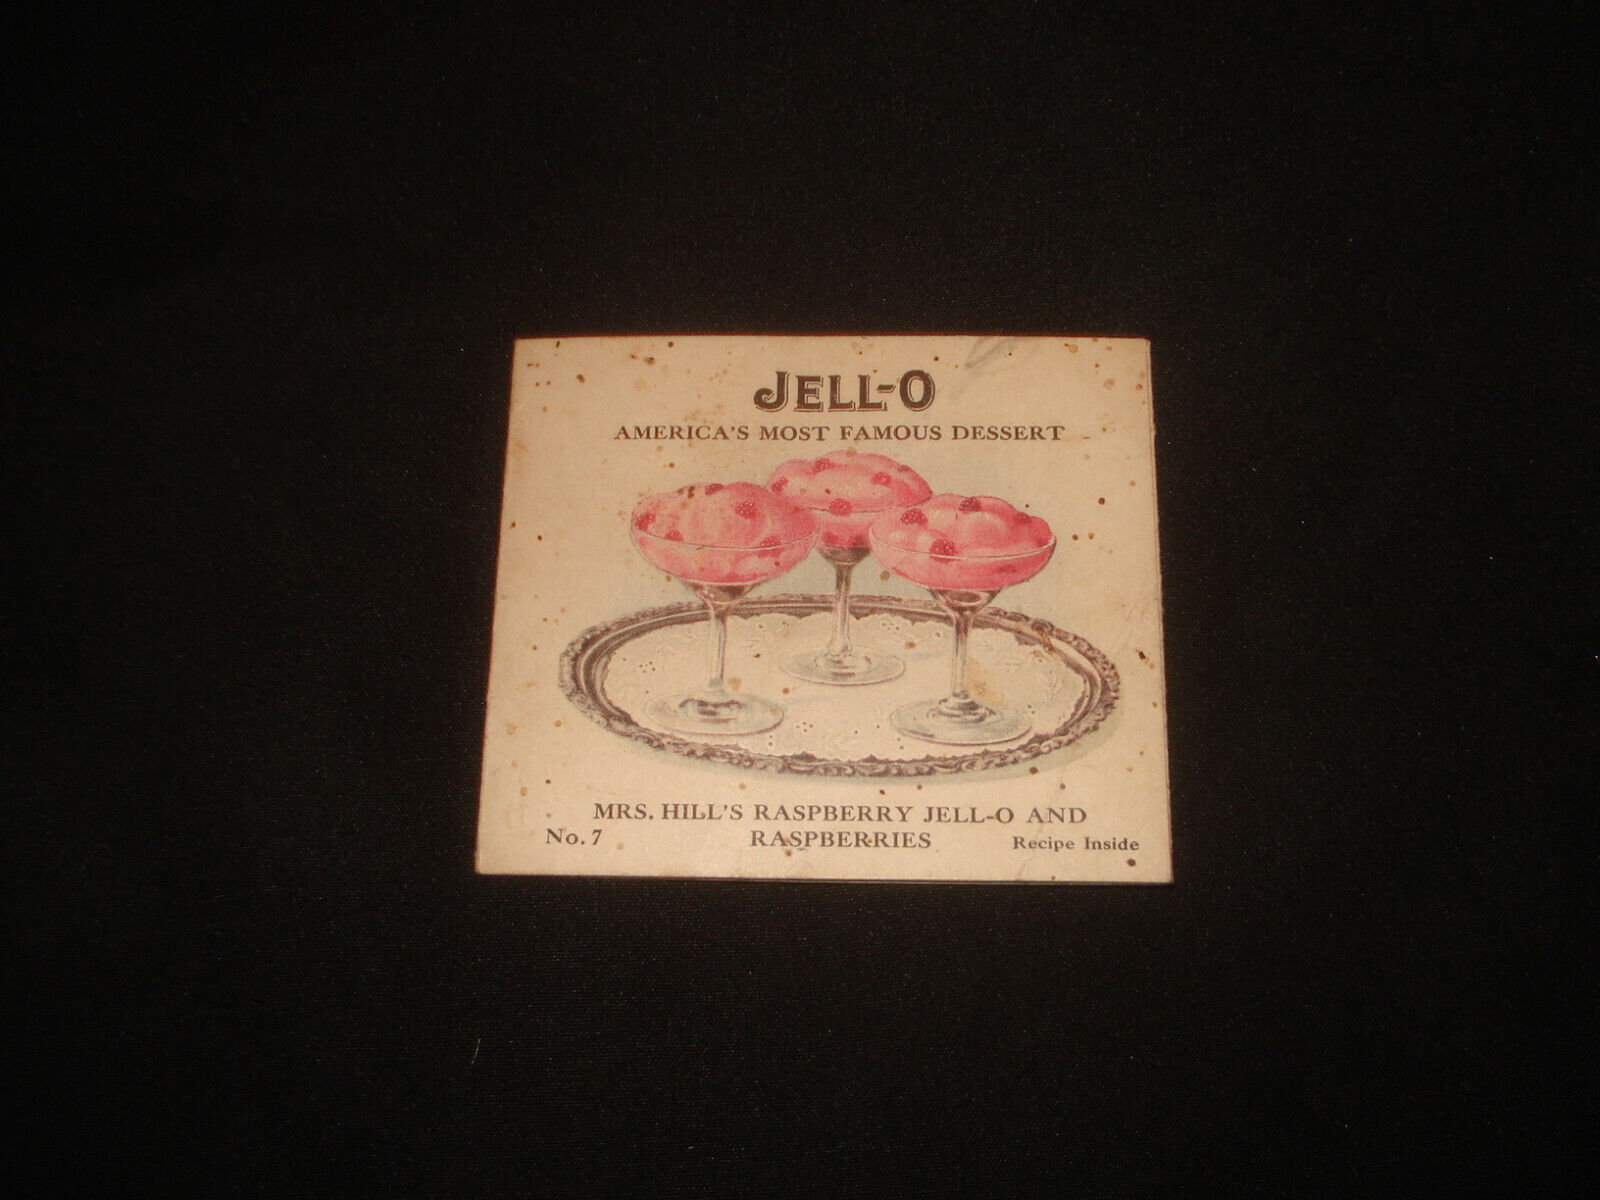 Antique Jell-O Jello Victorian Advertising Cookbook Recipes early 1900s